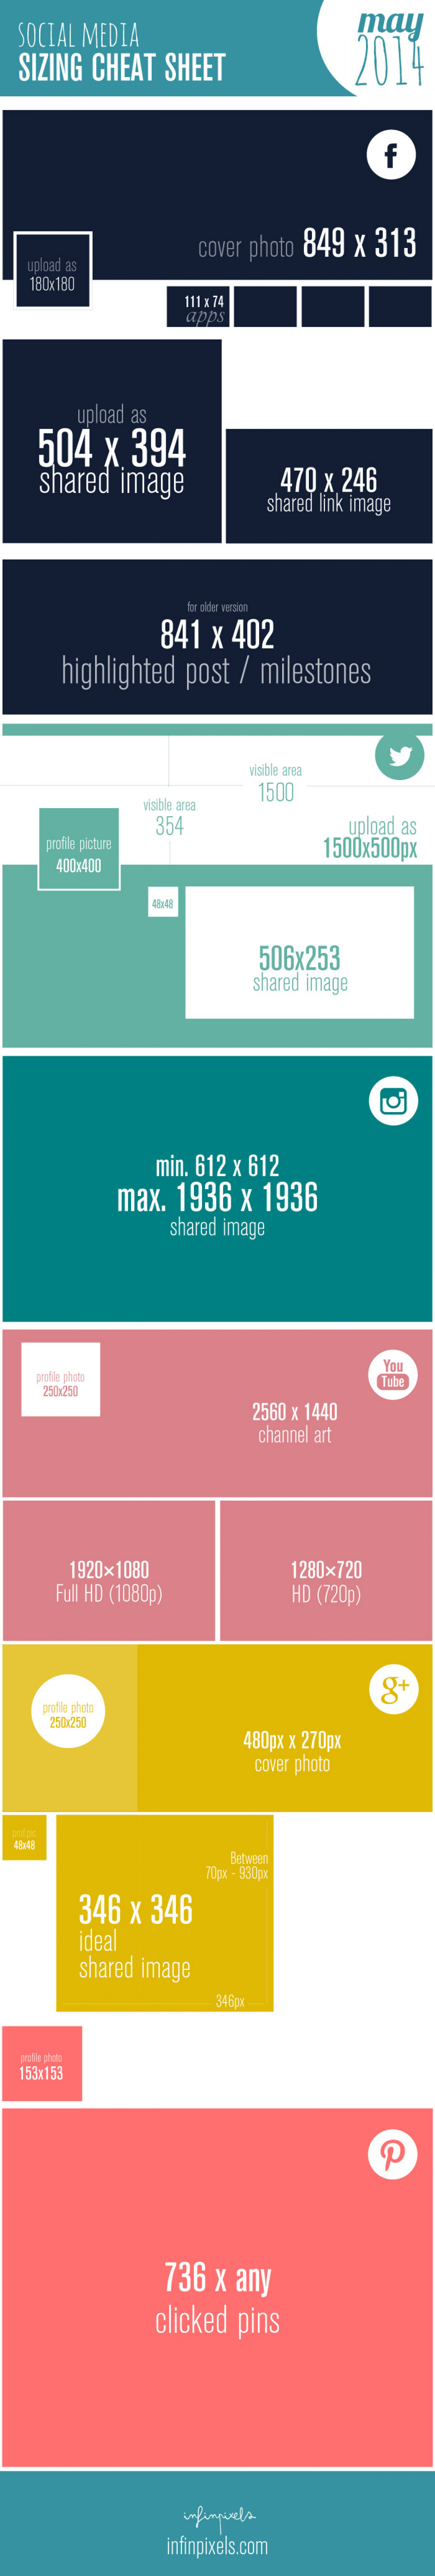 Social Media Sizing Cheat Sheet - 2014 - Edition 03 Infographic